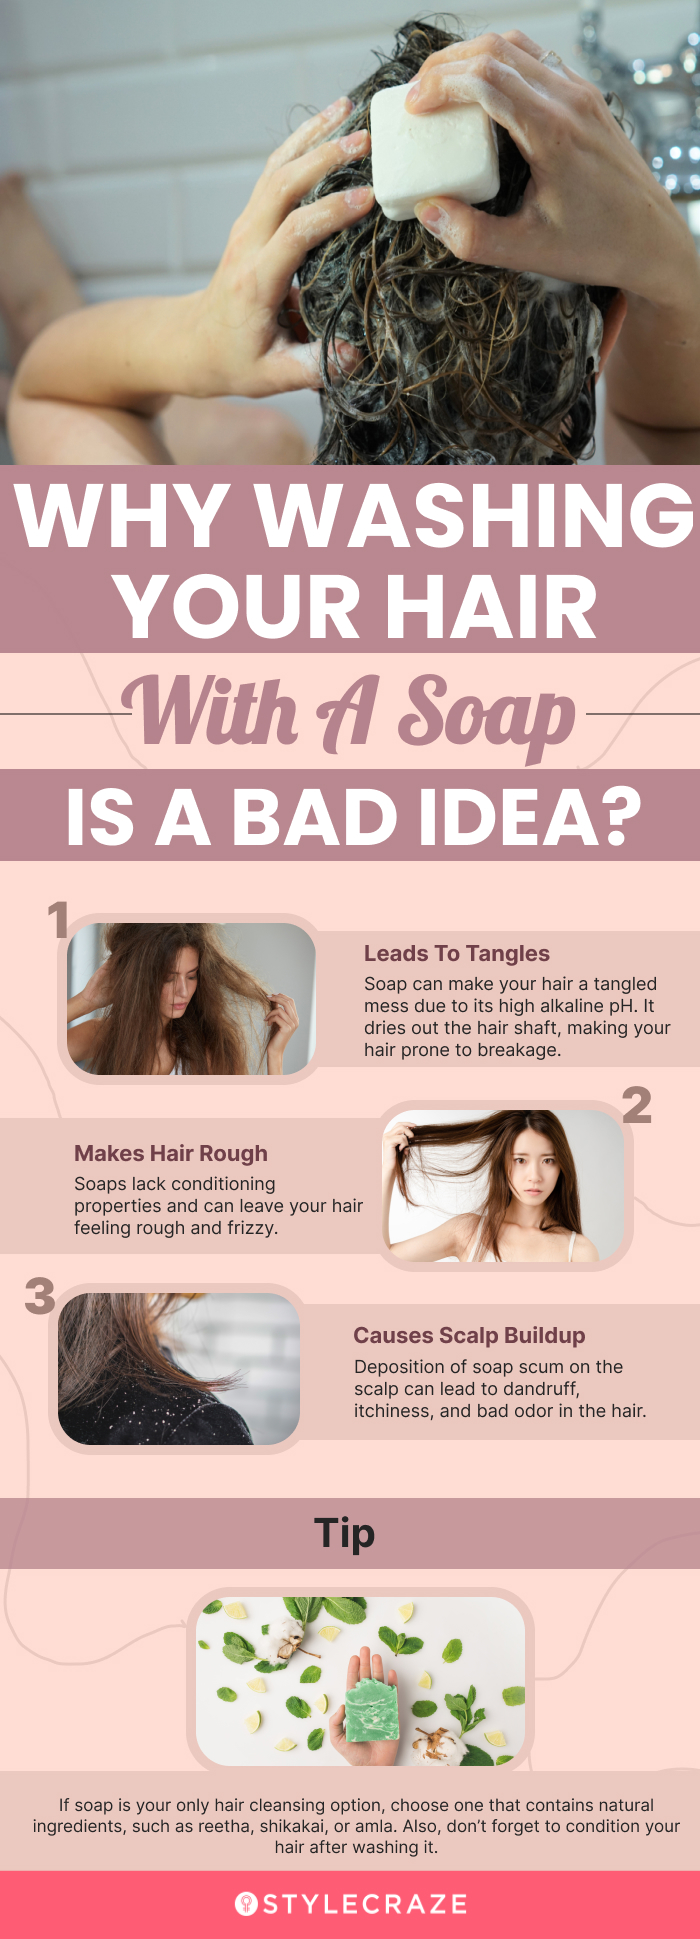 Is Washing Hair With Soap Instead Of Shampoo Bad?